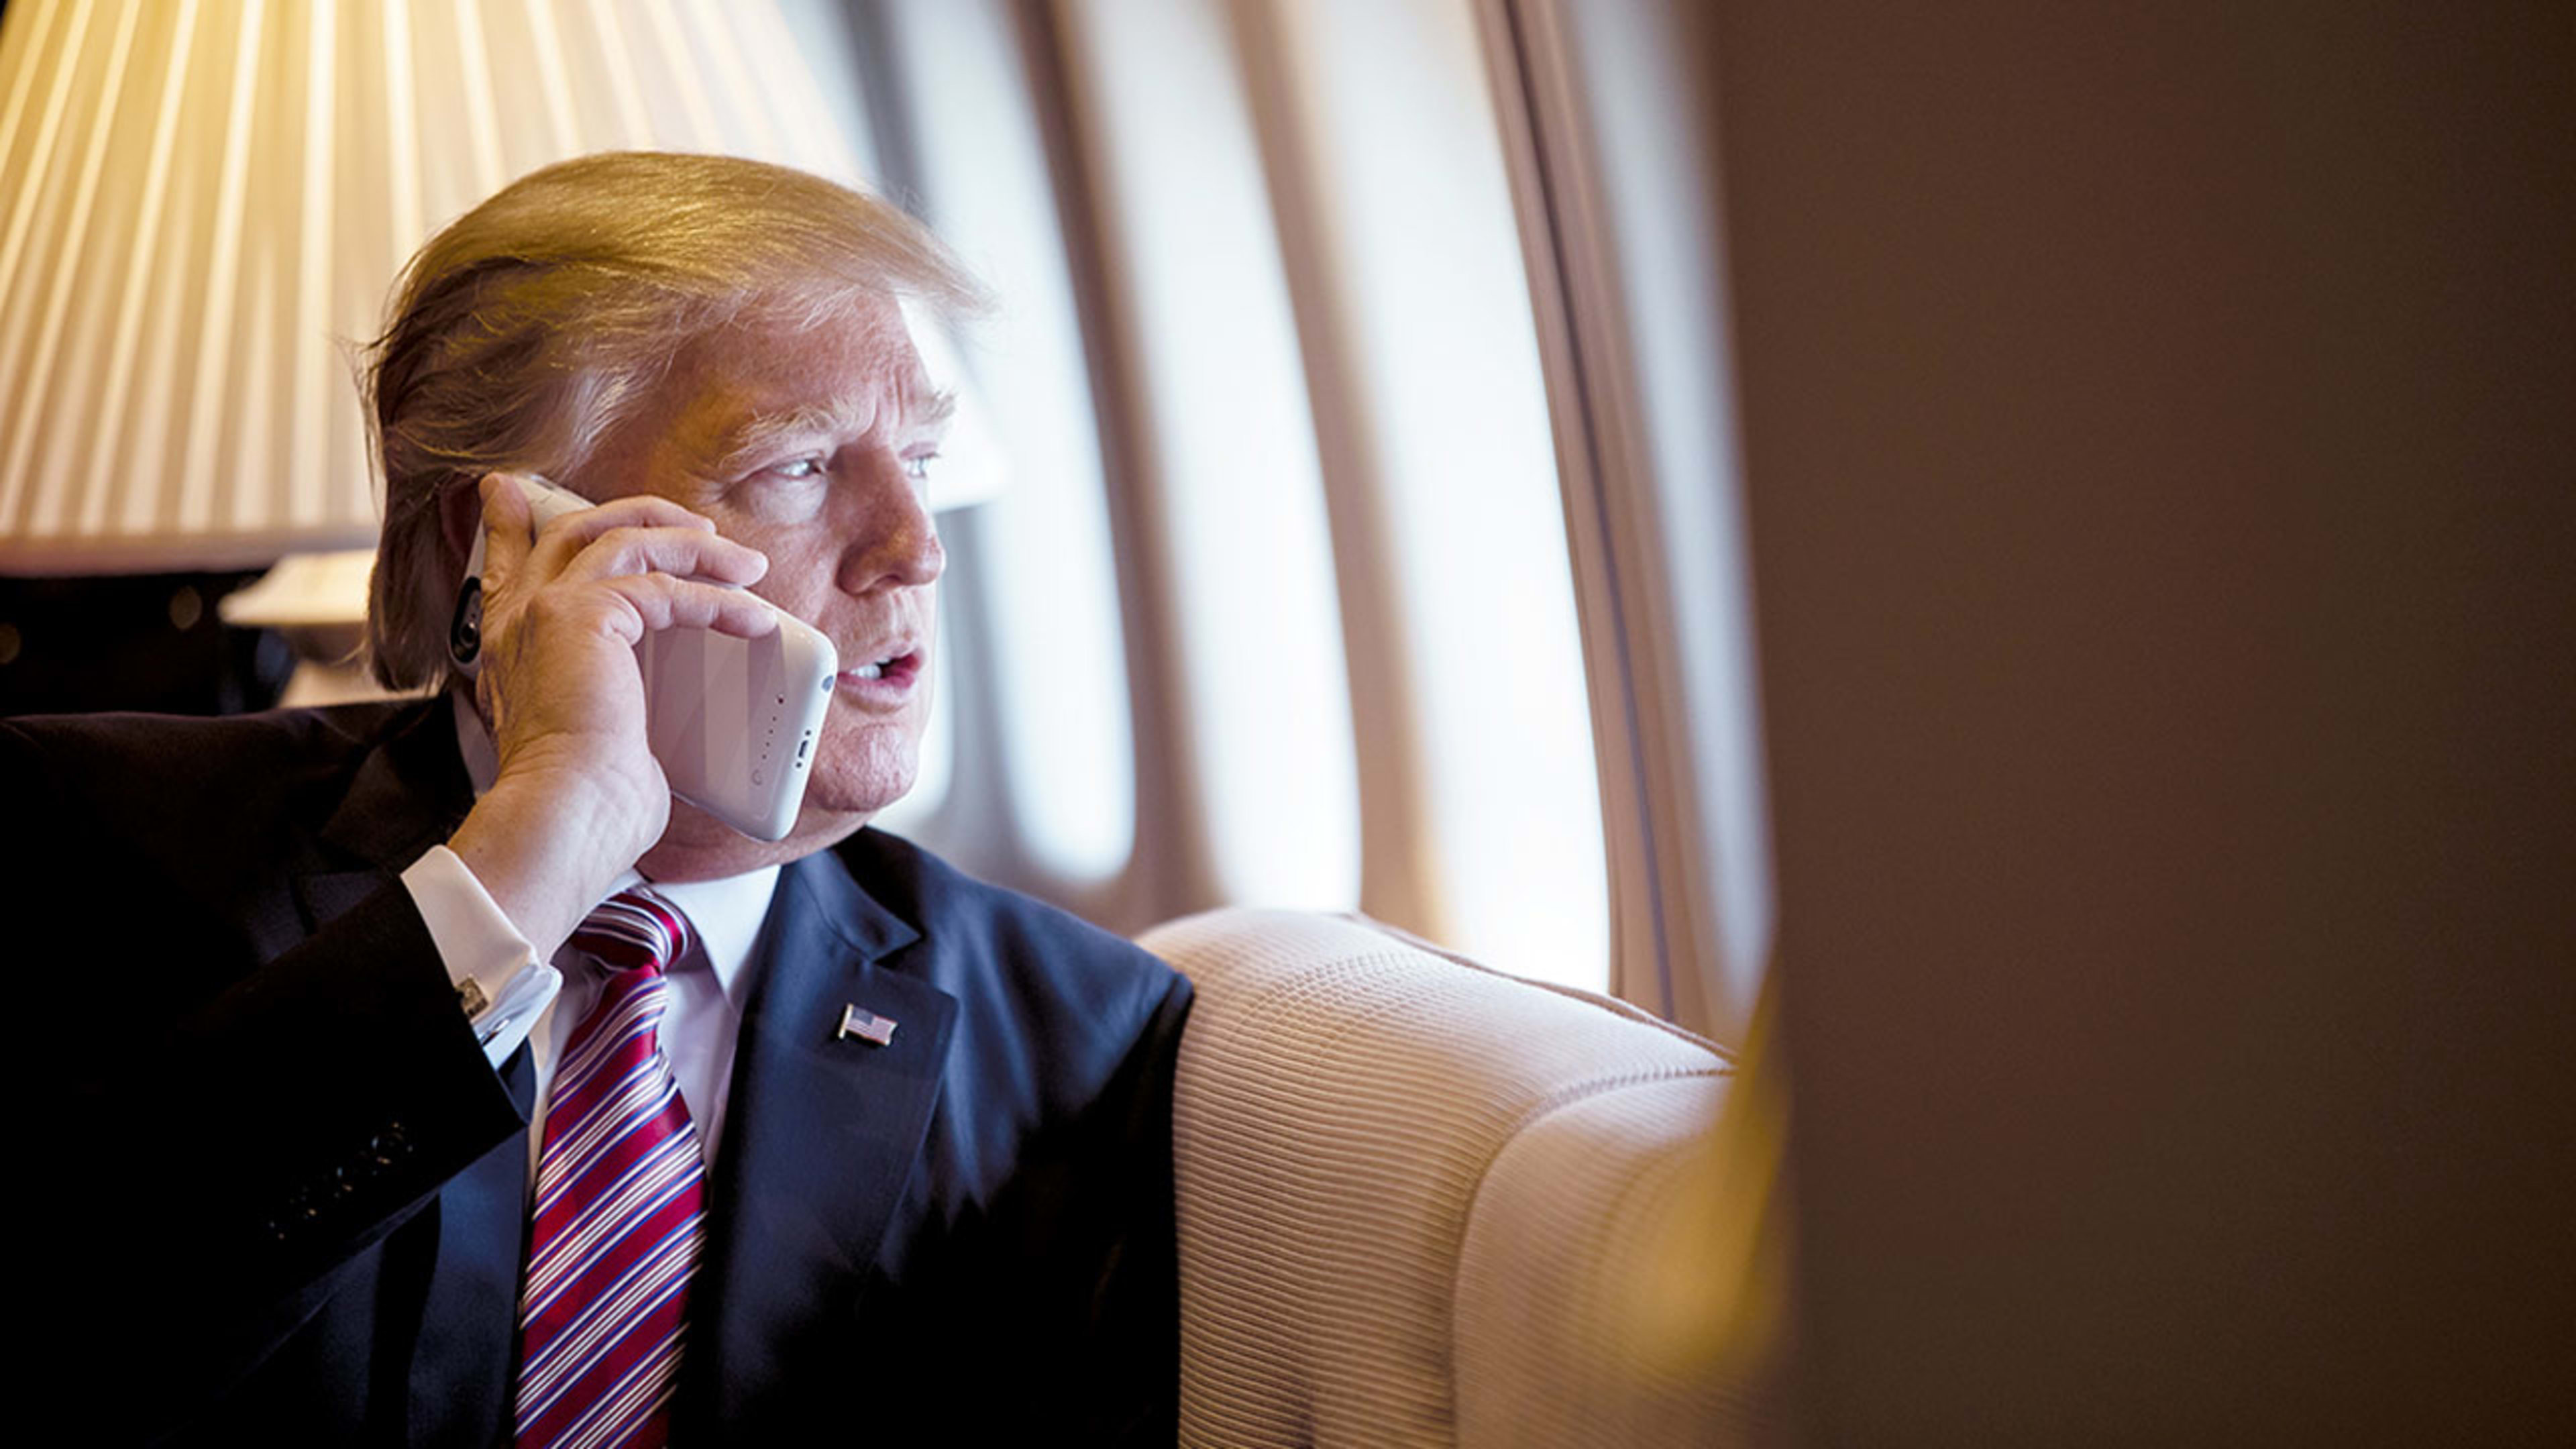 Trump has an iPhone dedicated to tweeting, and it poses a security risk